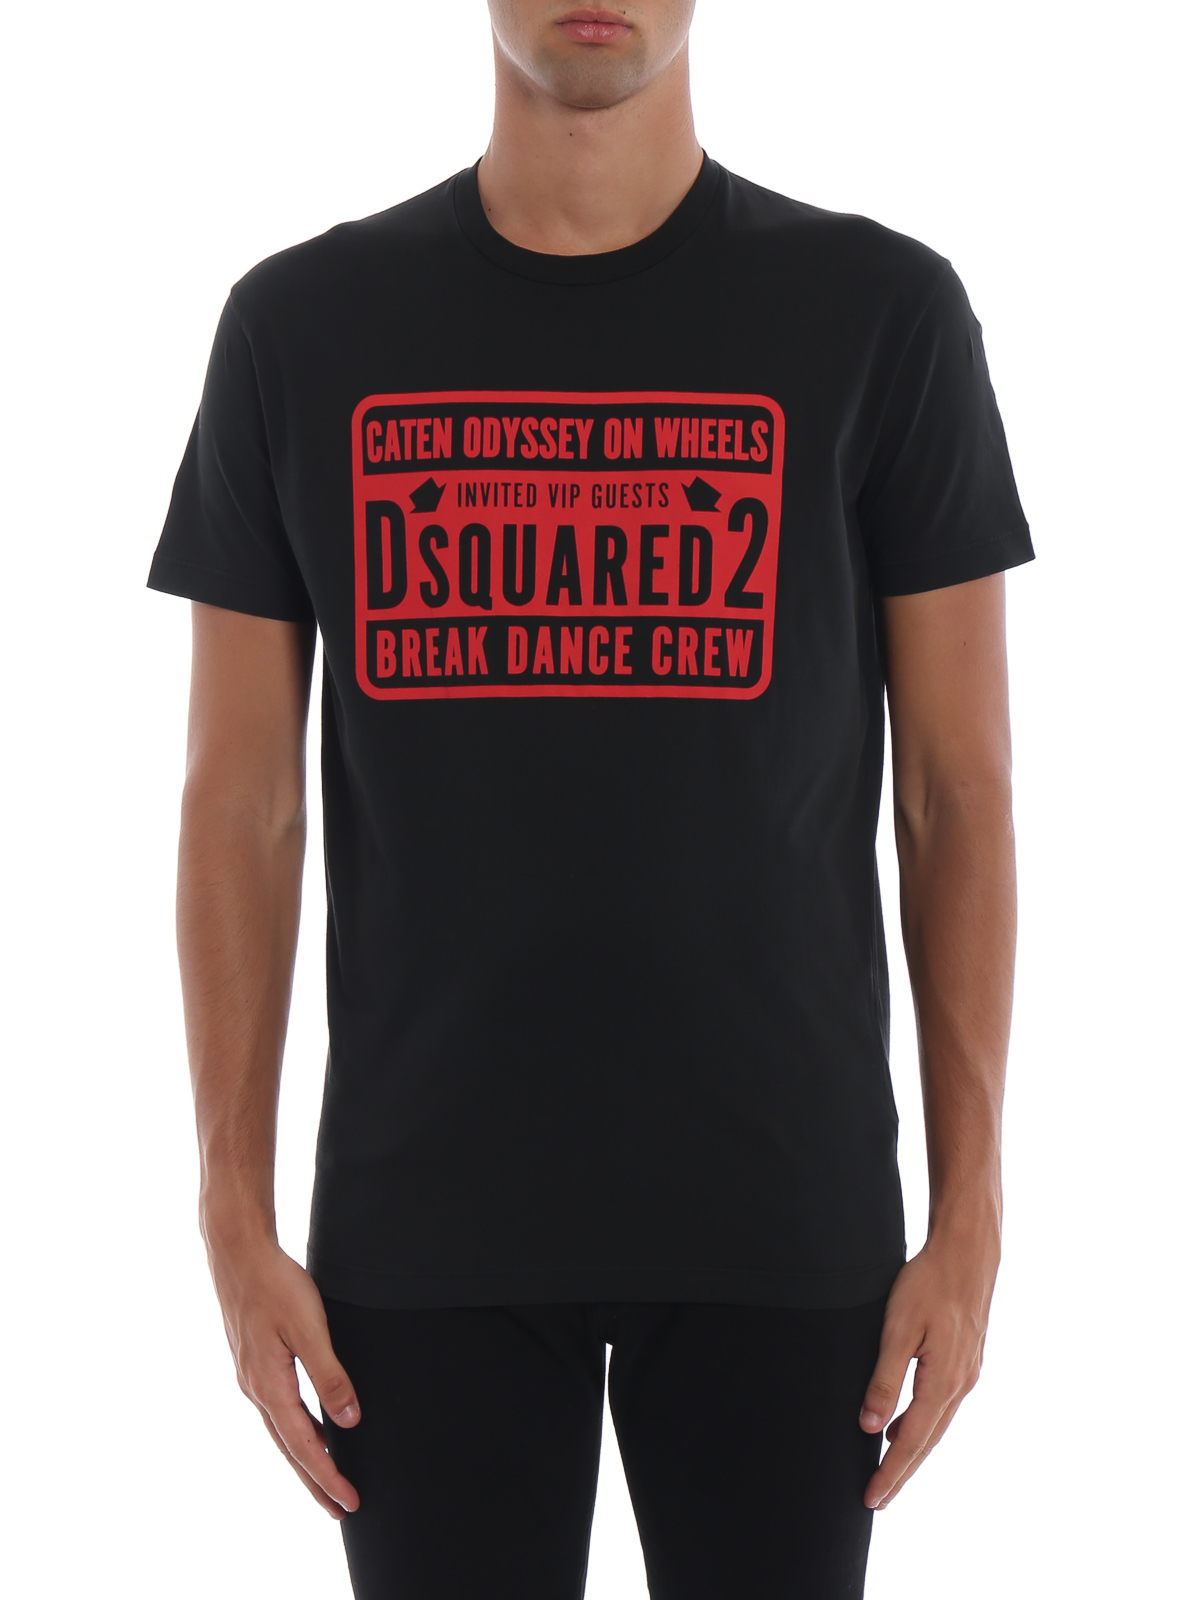 dsquared t shirt black and red